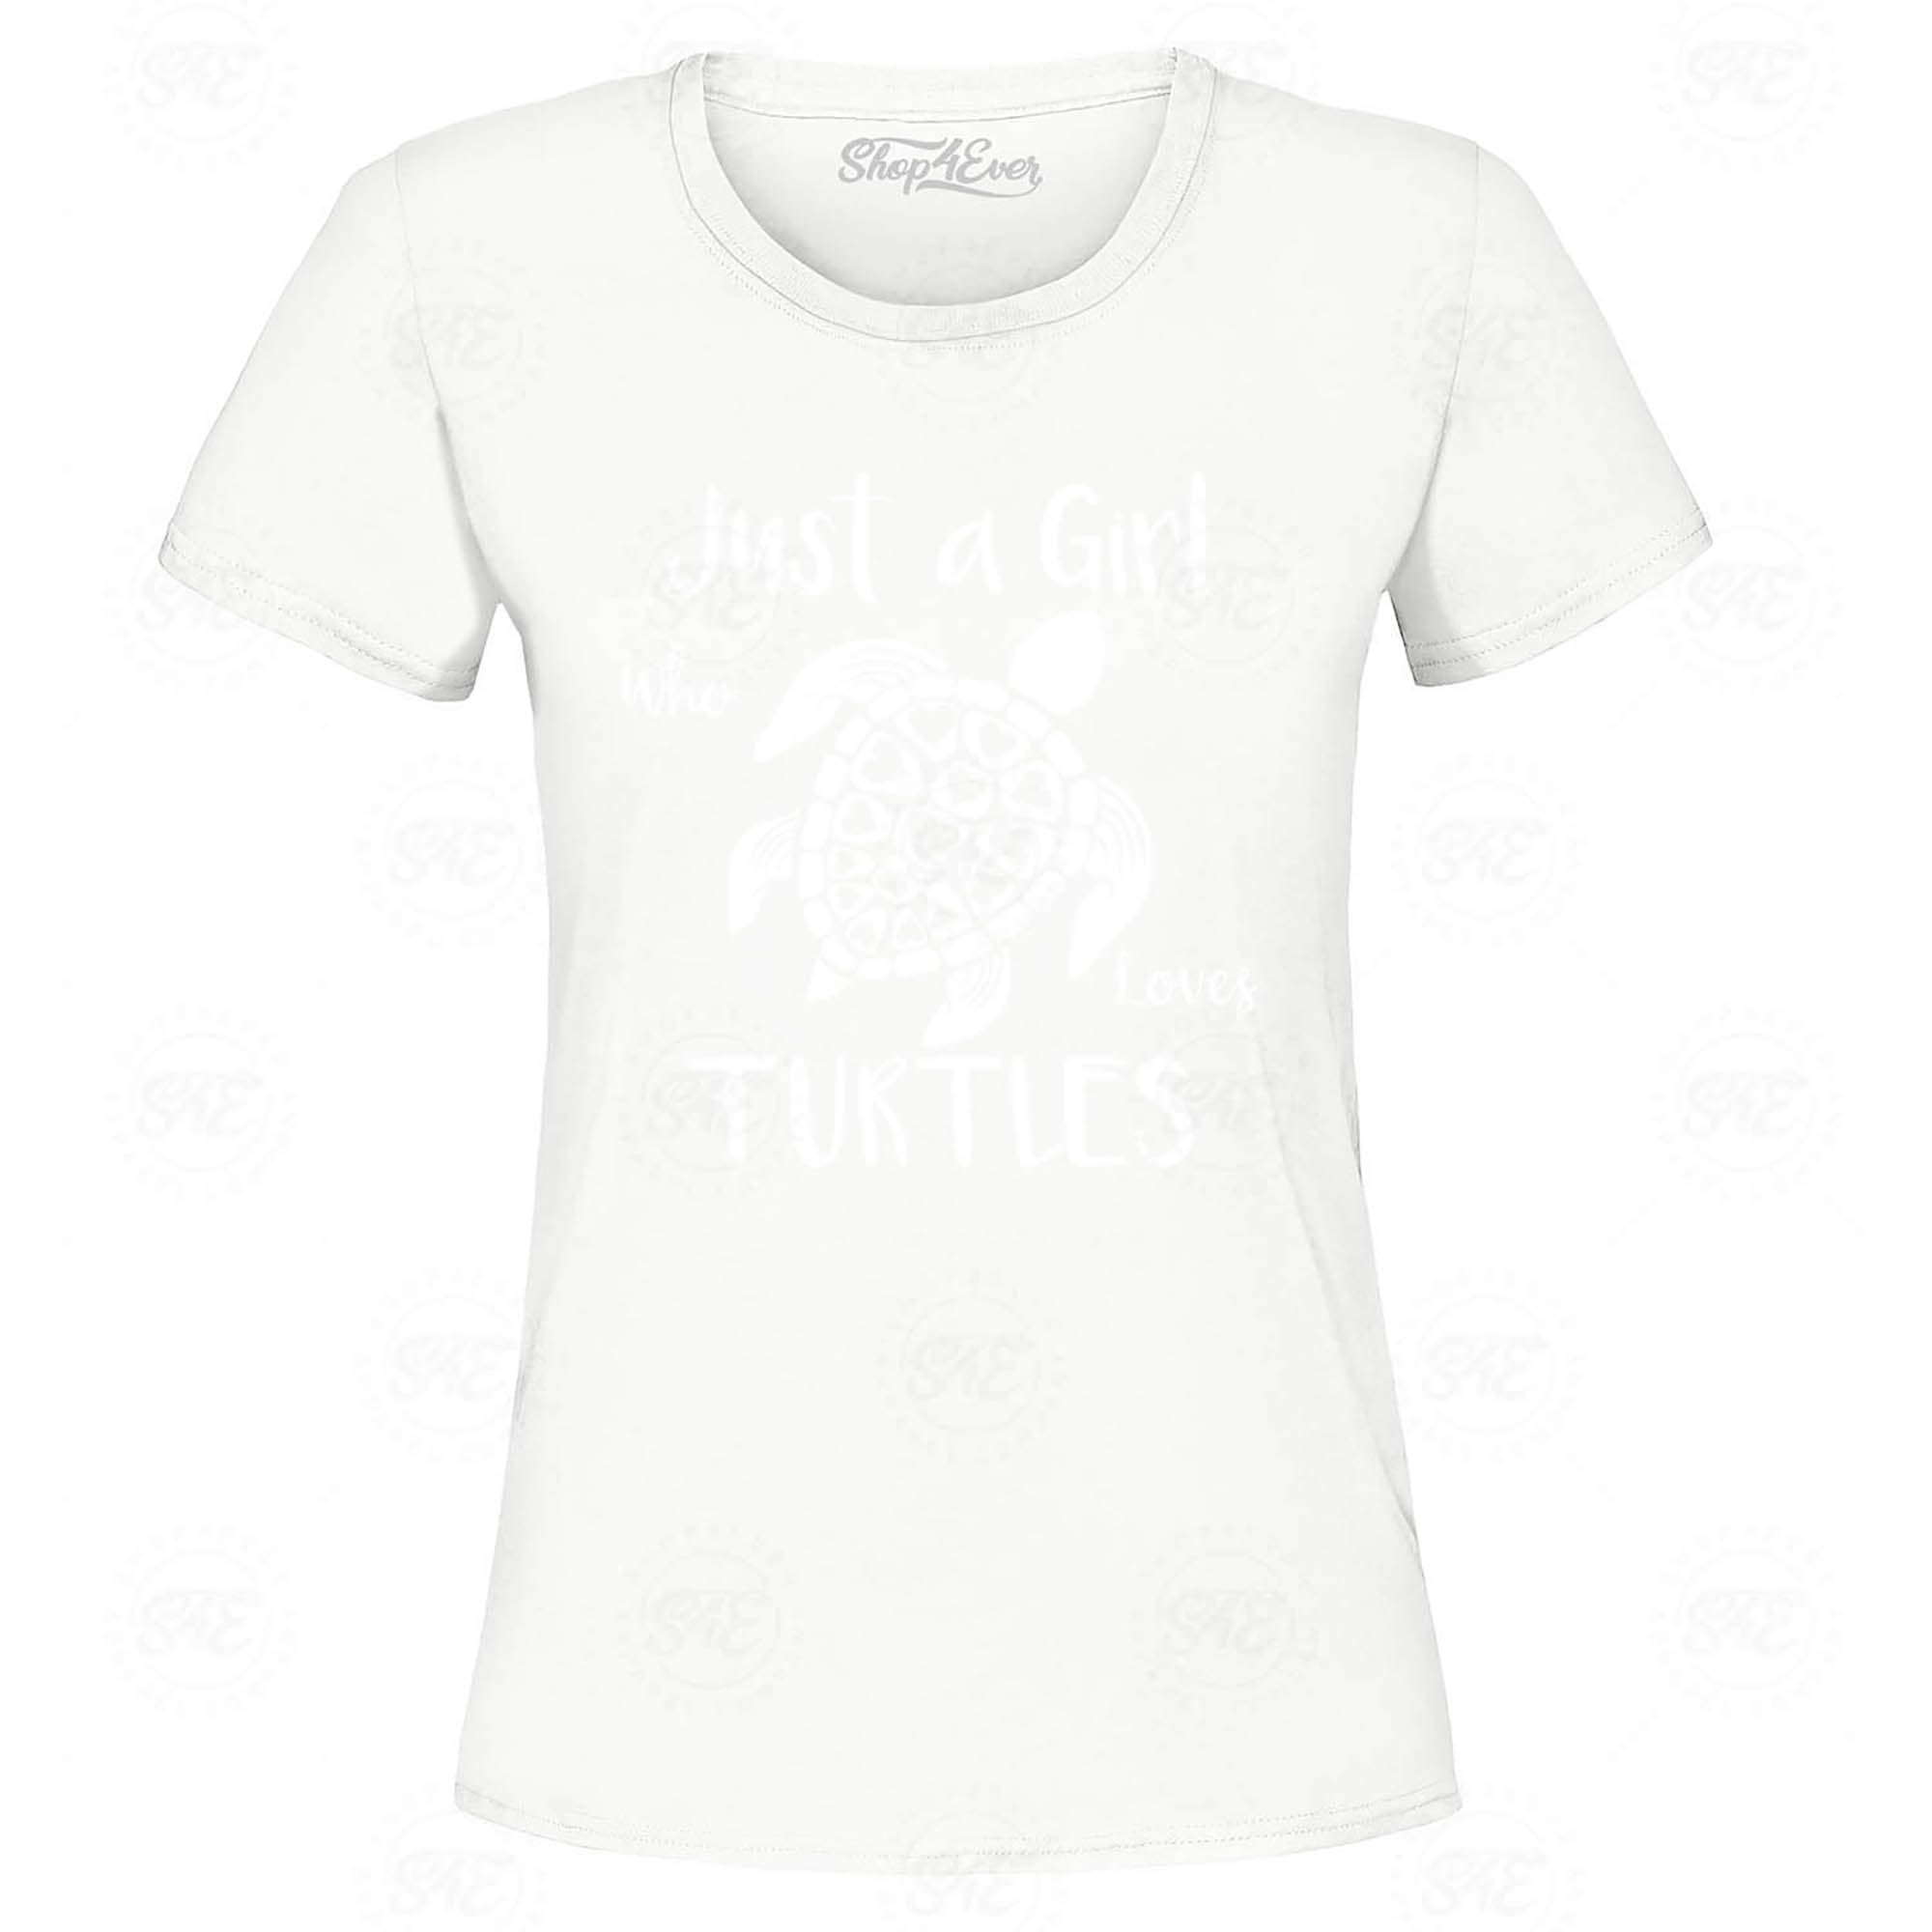 Just A Girl Who Loves Turtles Women's T-Shirt